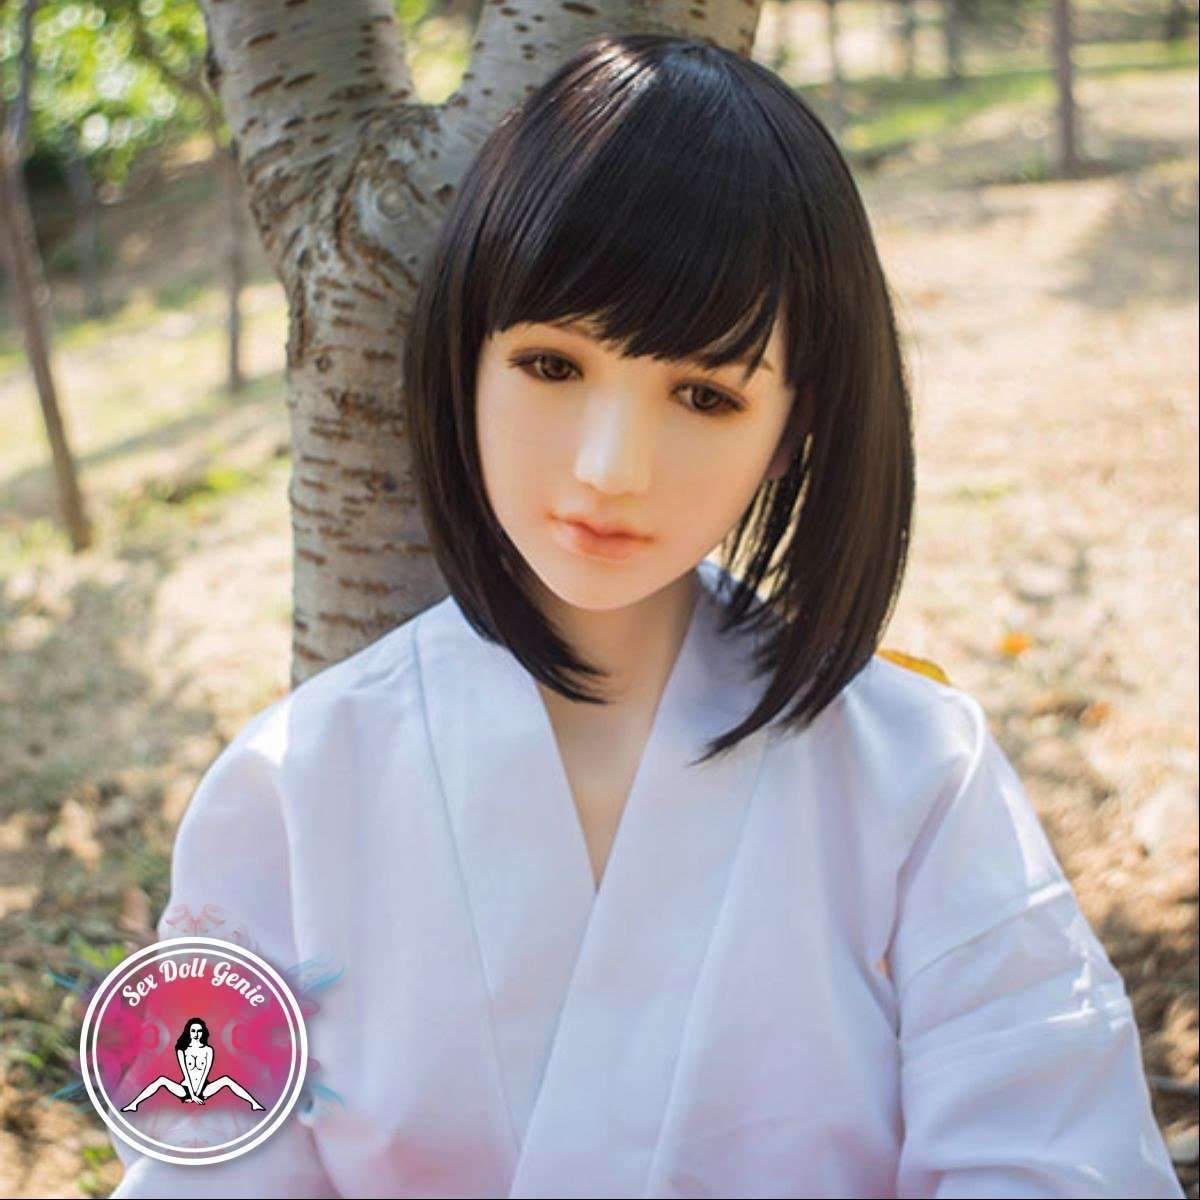 DS Doll - 160Plus - Helen Head - Type 1 D Cup Silicone Doll-4